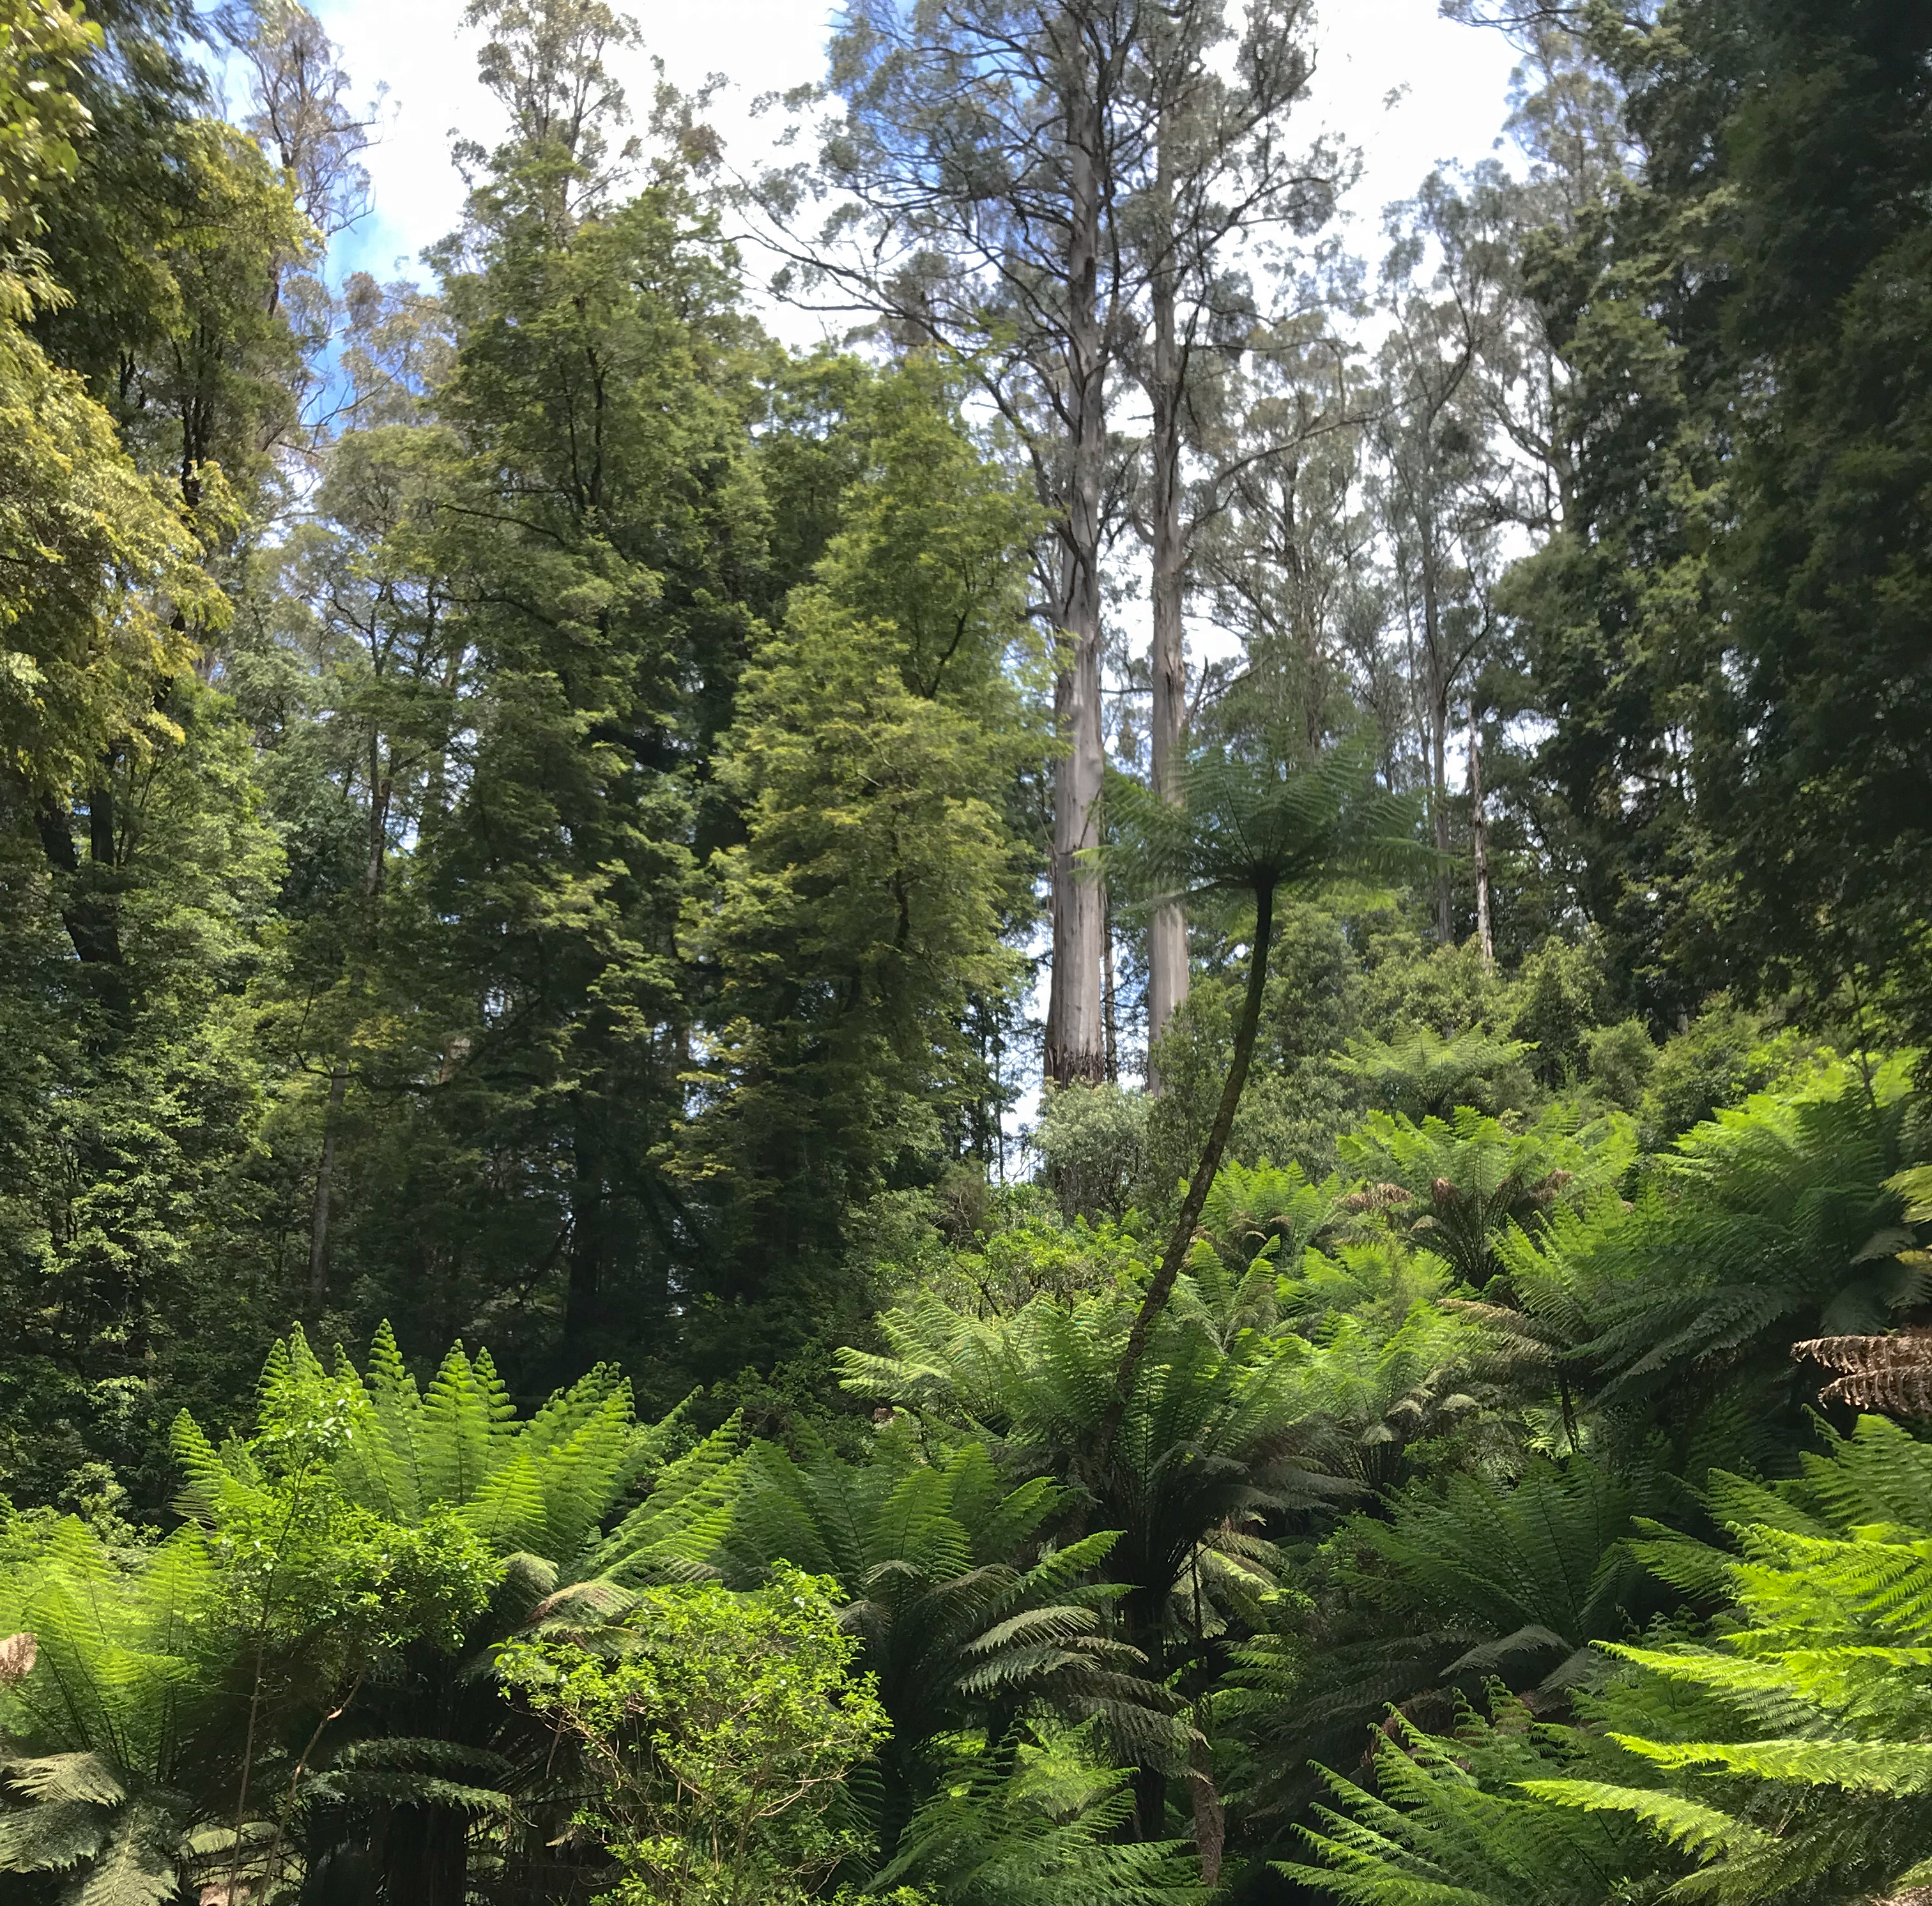 ferns and gum trees pictured